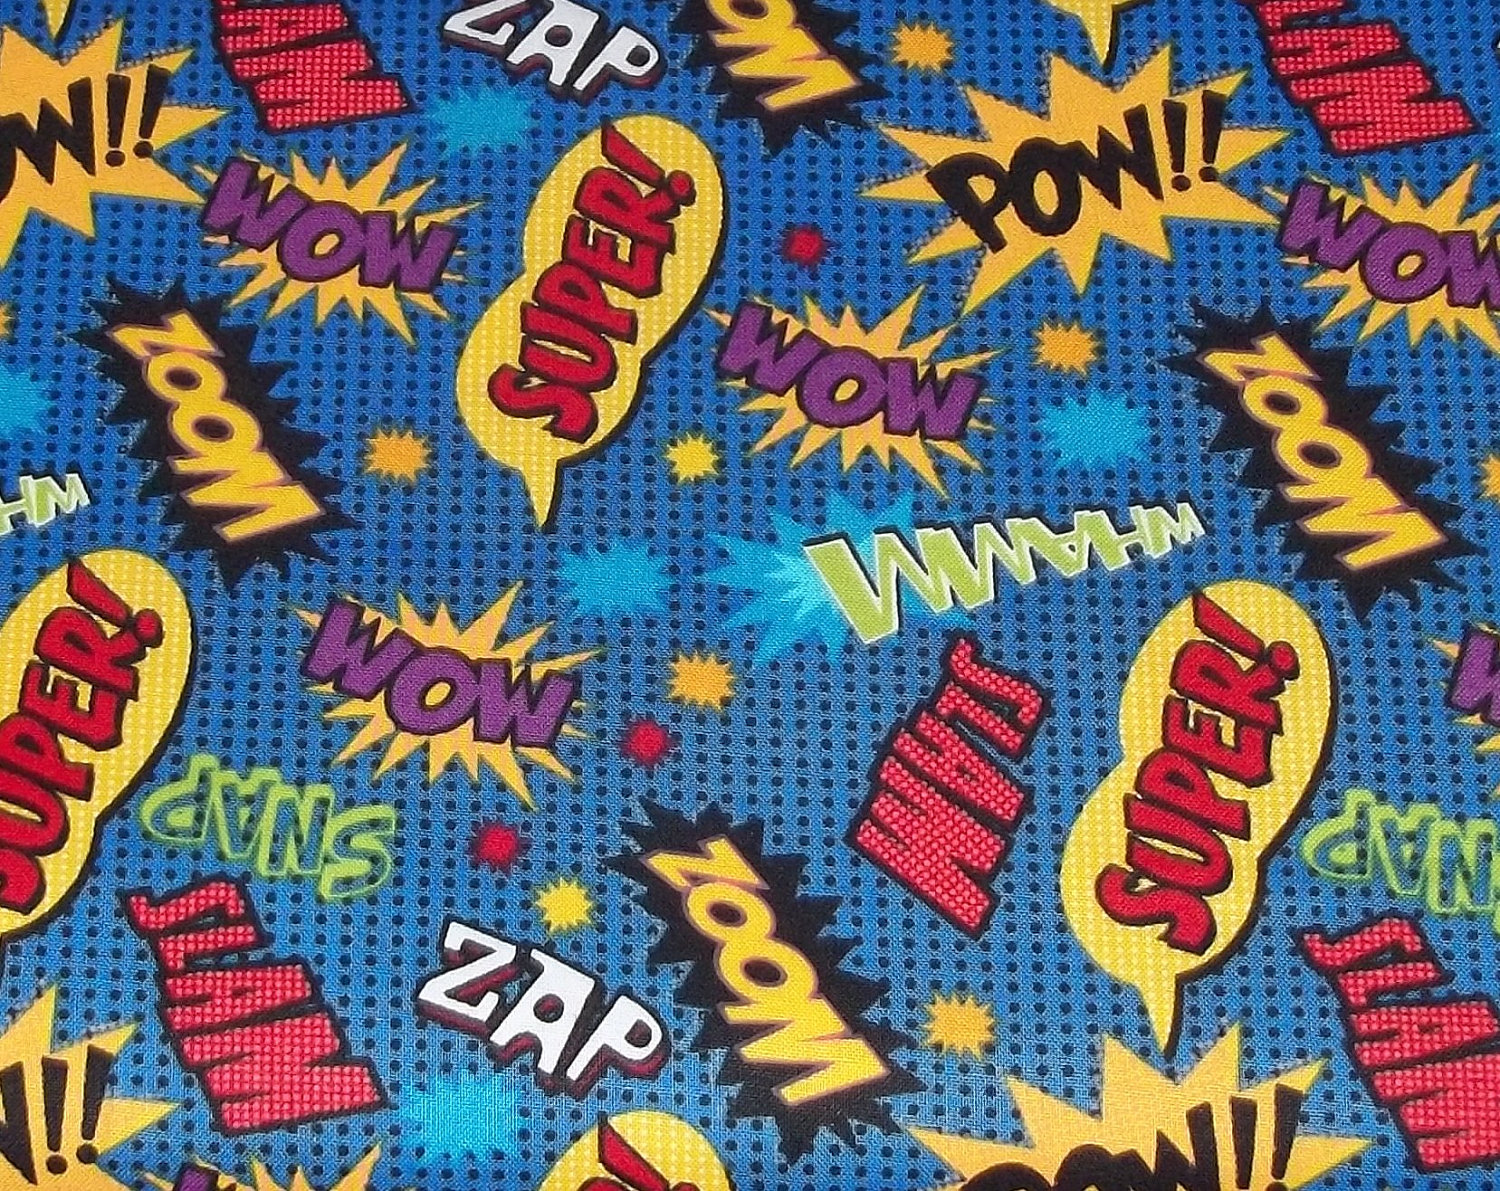 Super Hero Action Words Fabric By The Yard By Cutiepiecraftsupply